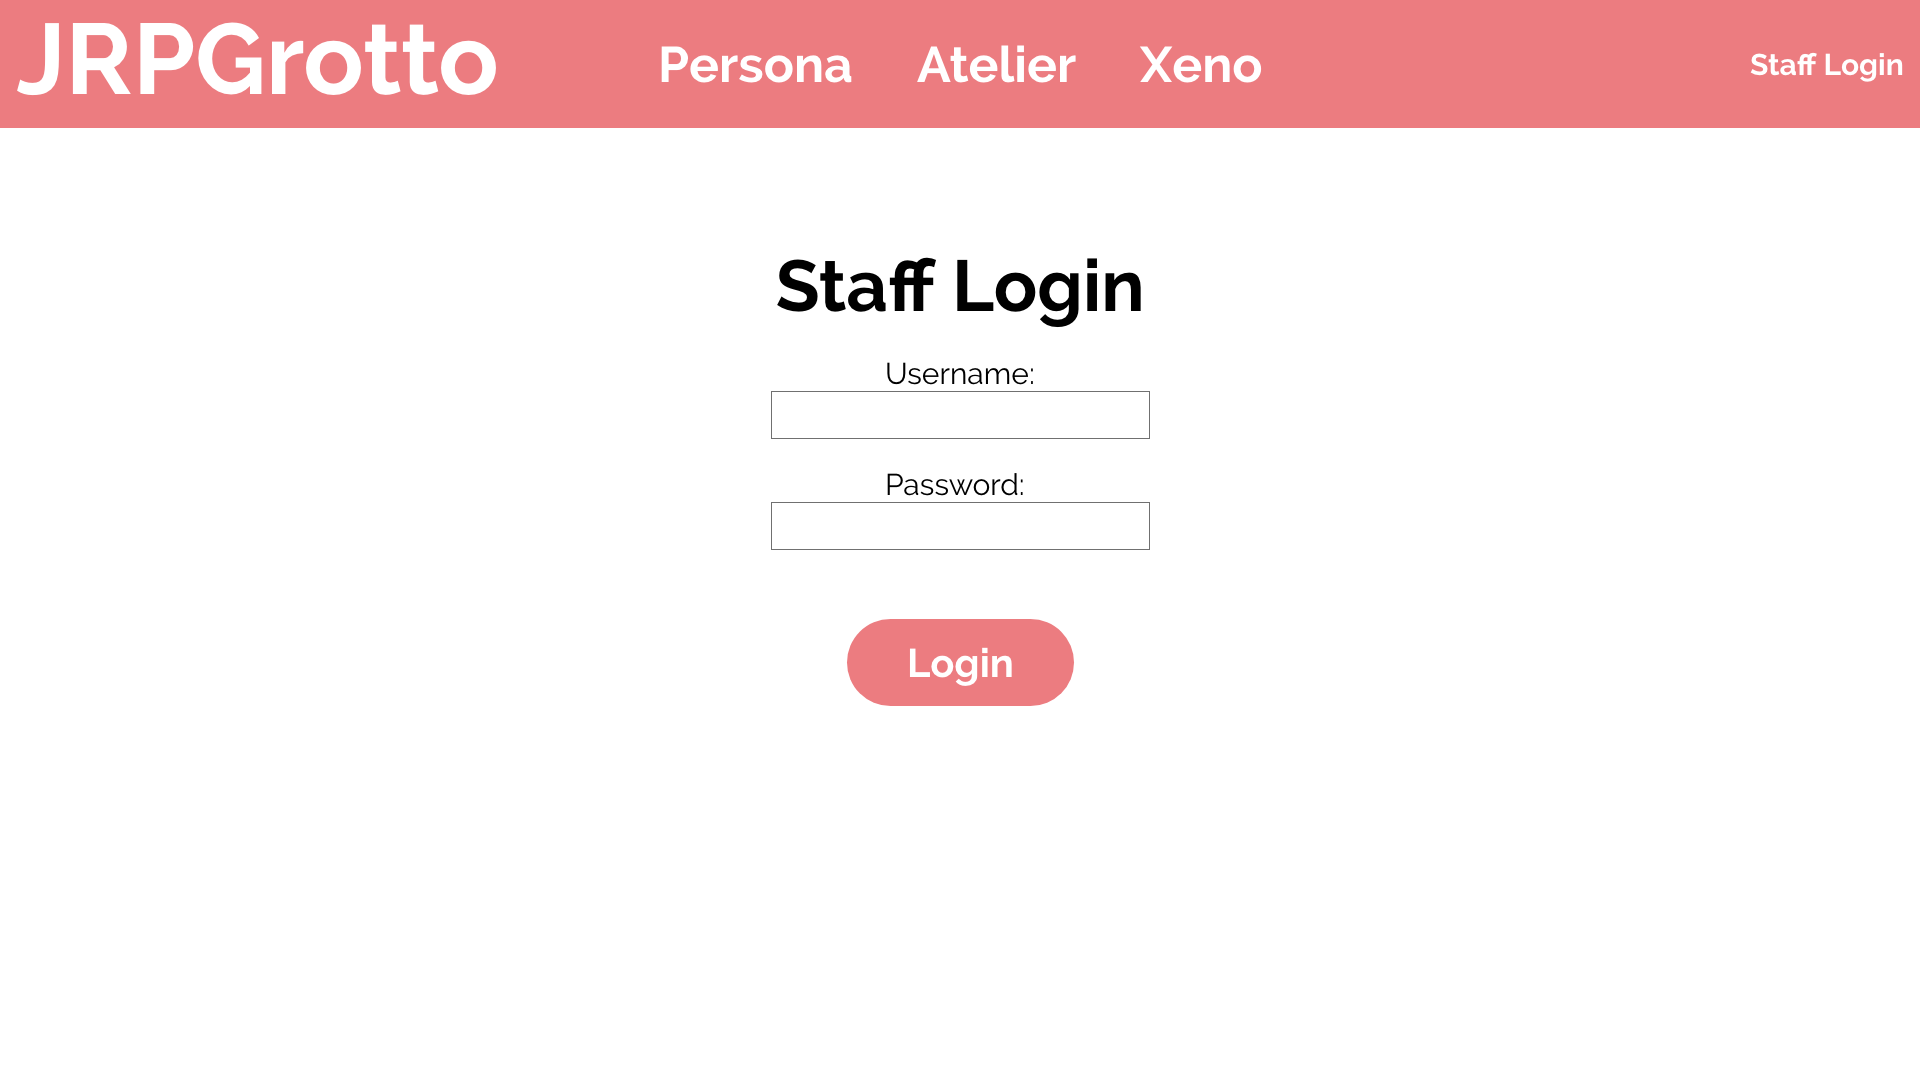 Login Page for Staff